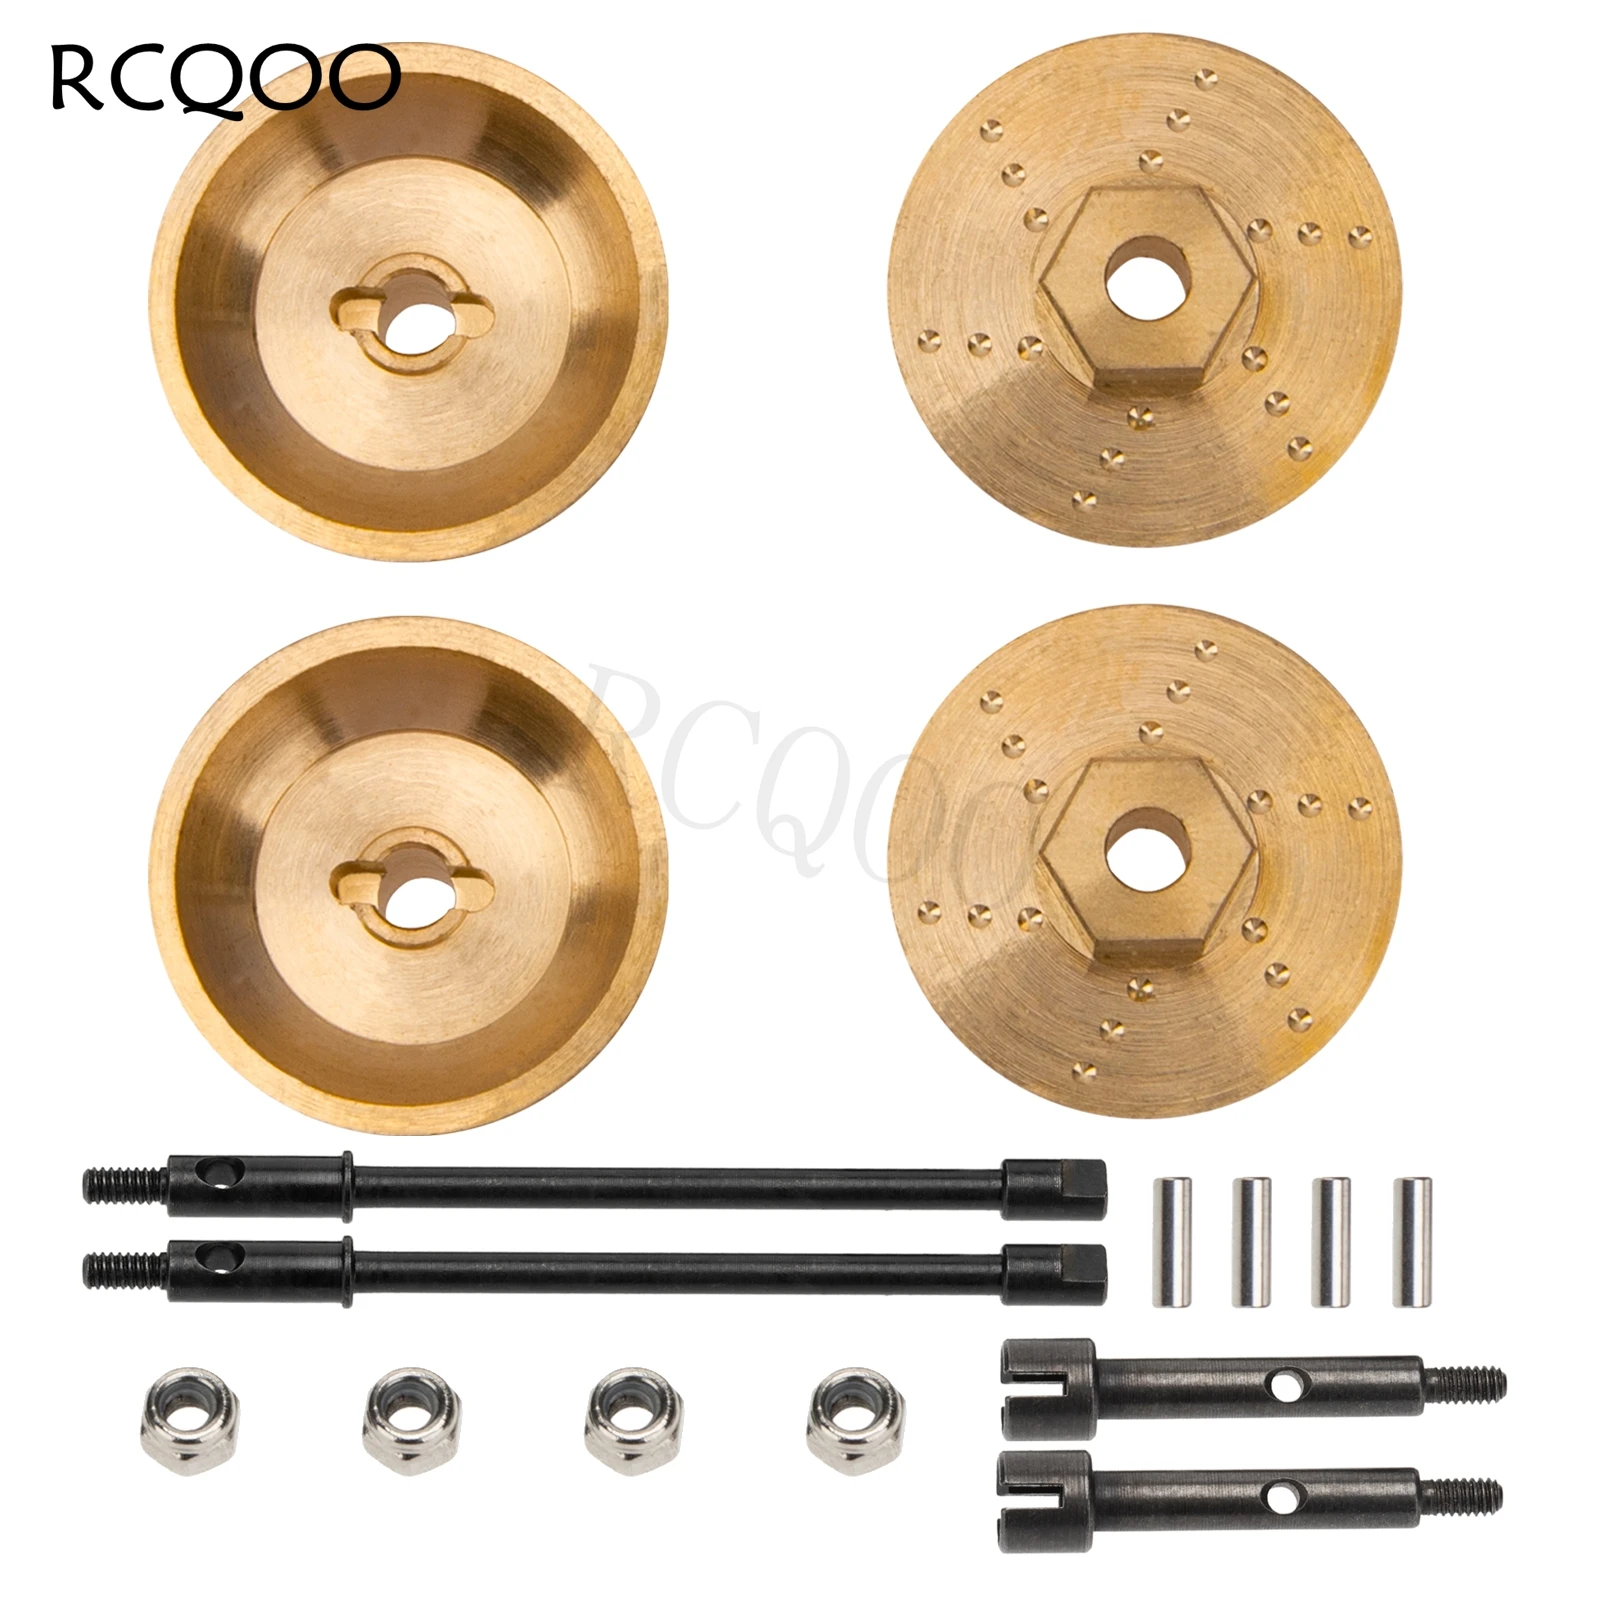 RC 6mm Brass Wheel Hub Knuckle Counterweight Front Rear Wheel Axle Drive Shaft Joint for Axial Scx24 AXI00002 1/24 RC Crawler